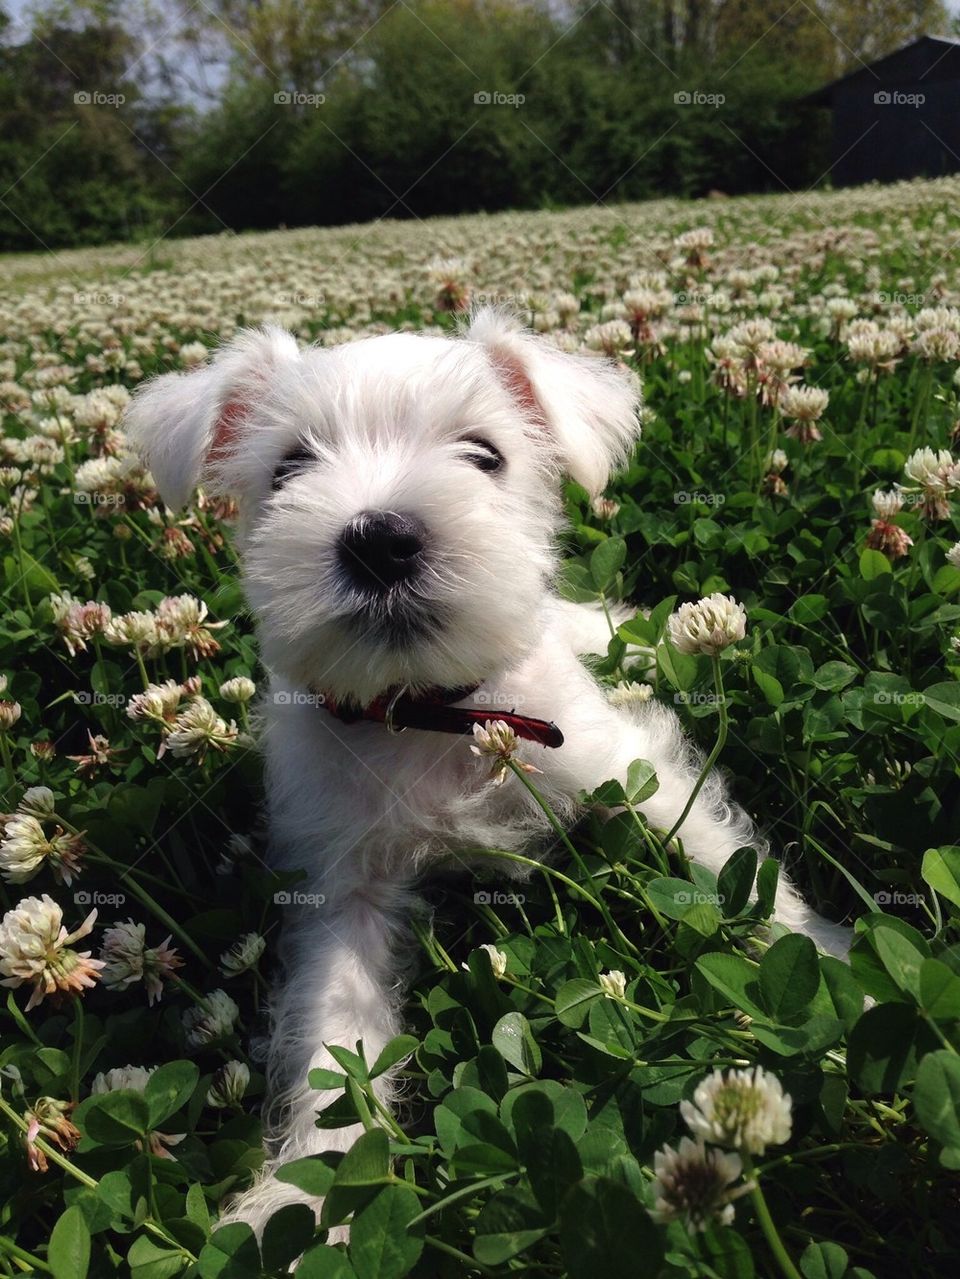 Casper laying in the clovers